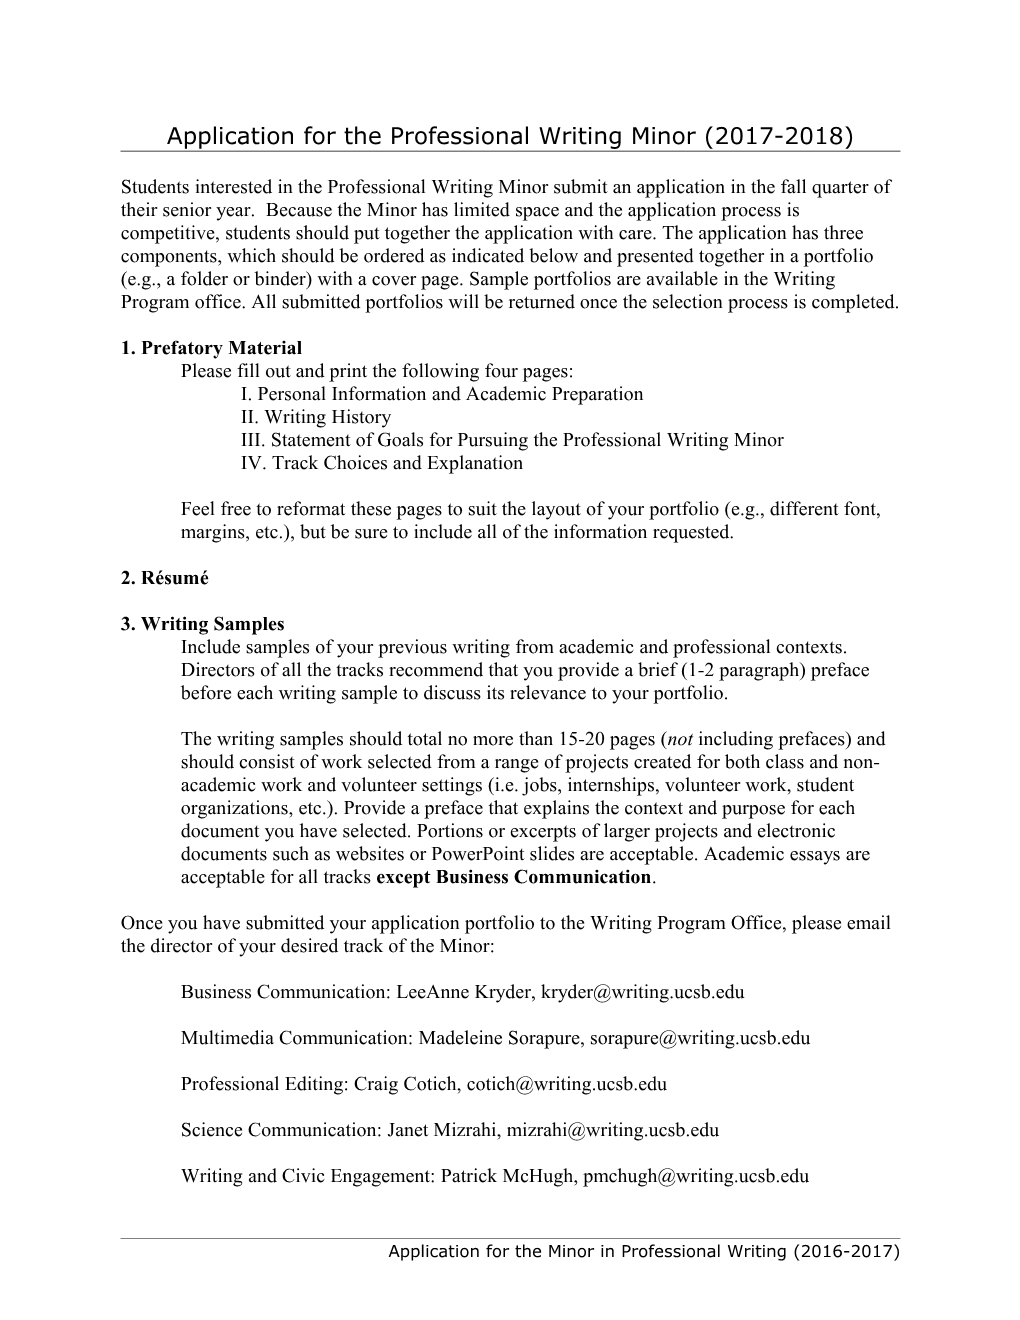 Application for the Minor in Professional Writing (2010-2011)